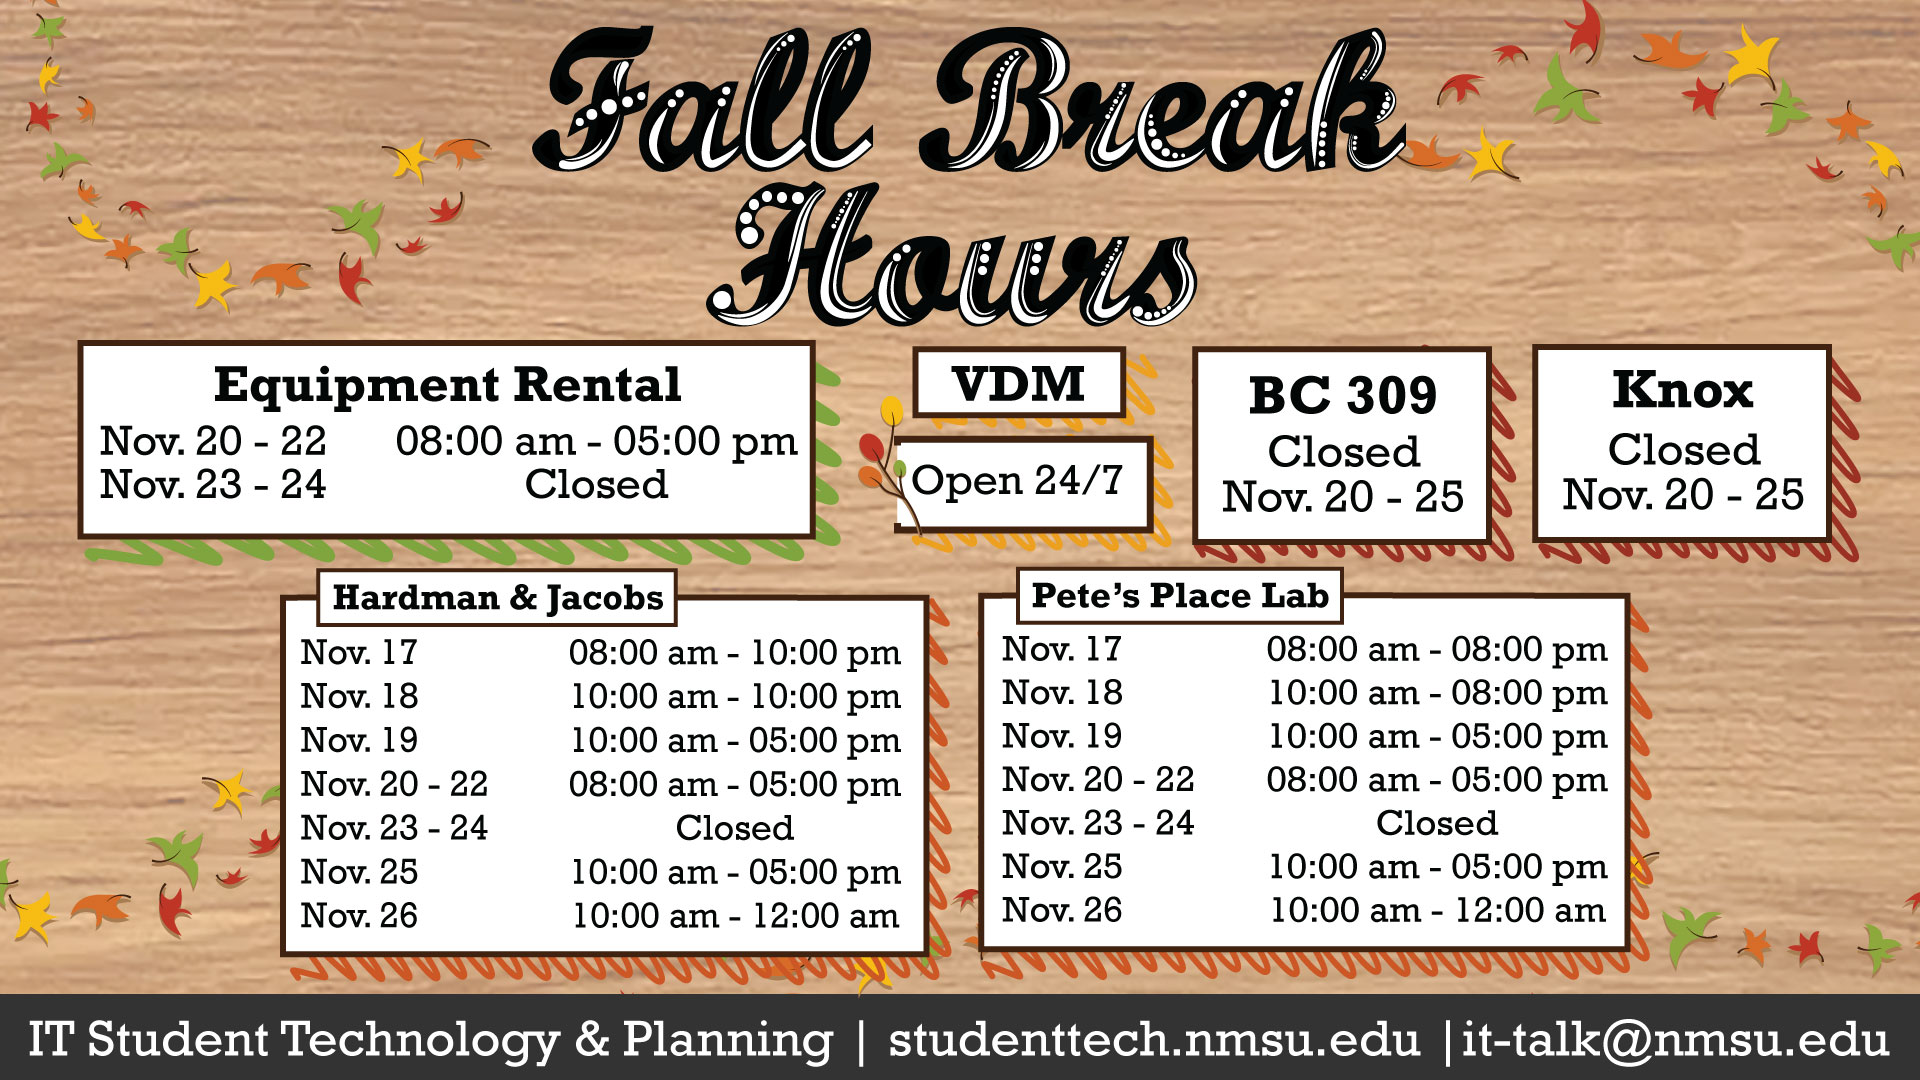 For computer lab hours, visit studenttech.nmsu.edu/labs.